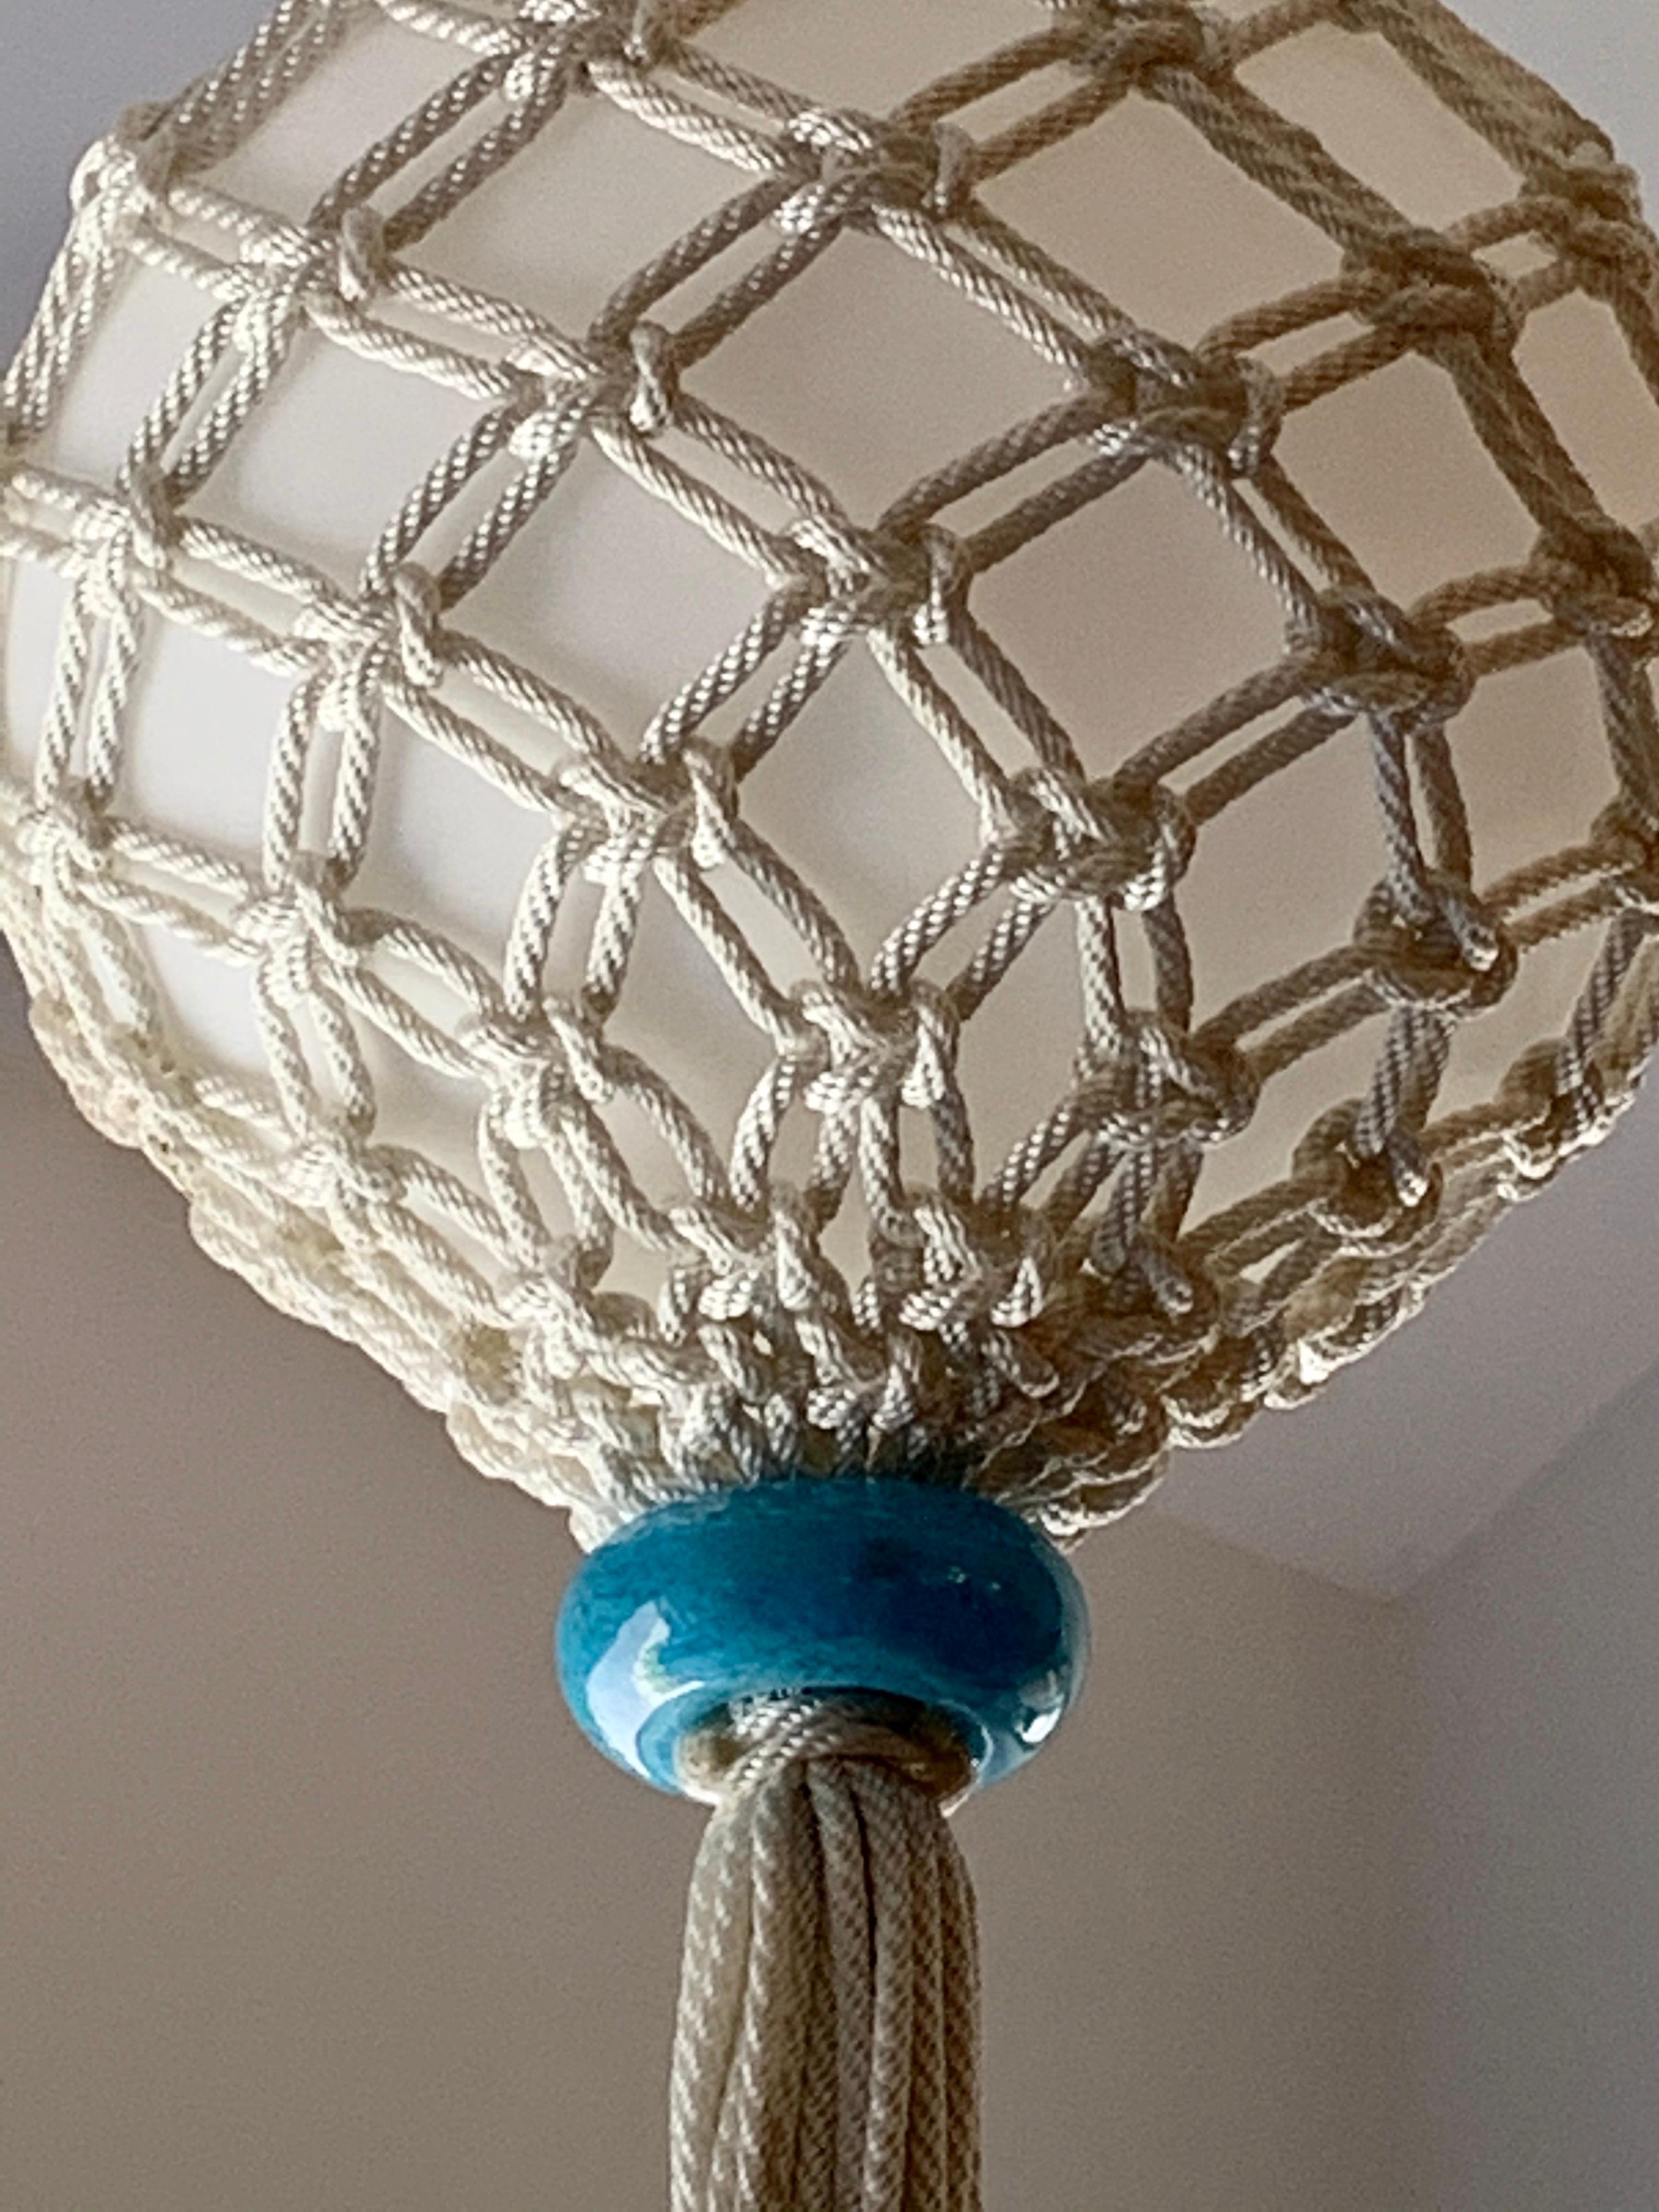 Very much looking like a marina floating buoy, this Murano glass globe is wrapped in beautiful polyurethane macrame rope. Two blue Murano glass adornments to top and bottom.